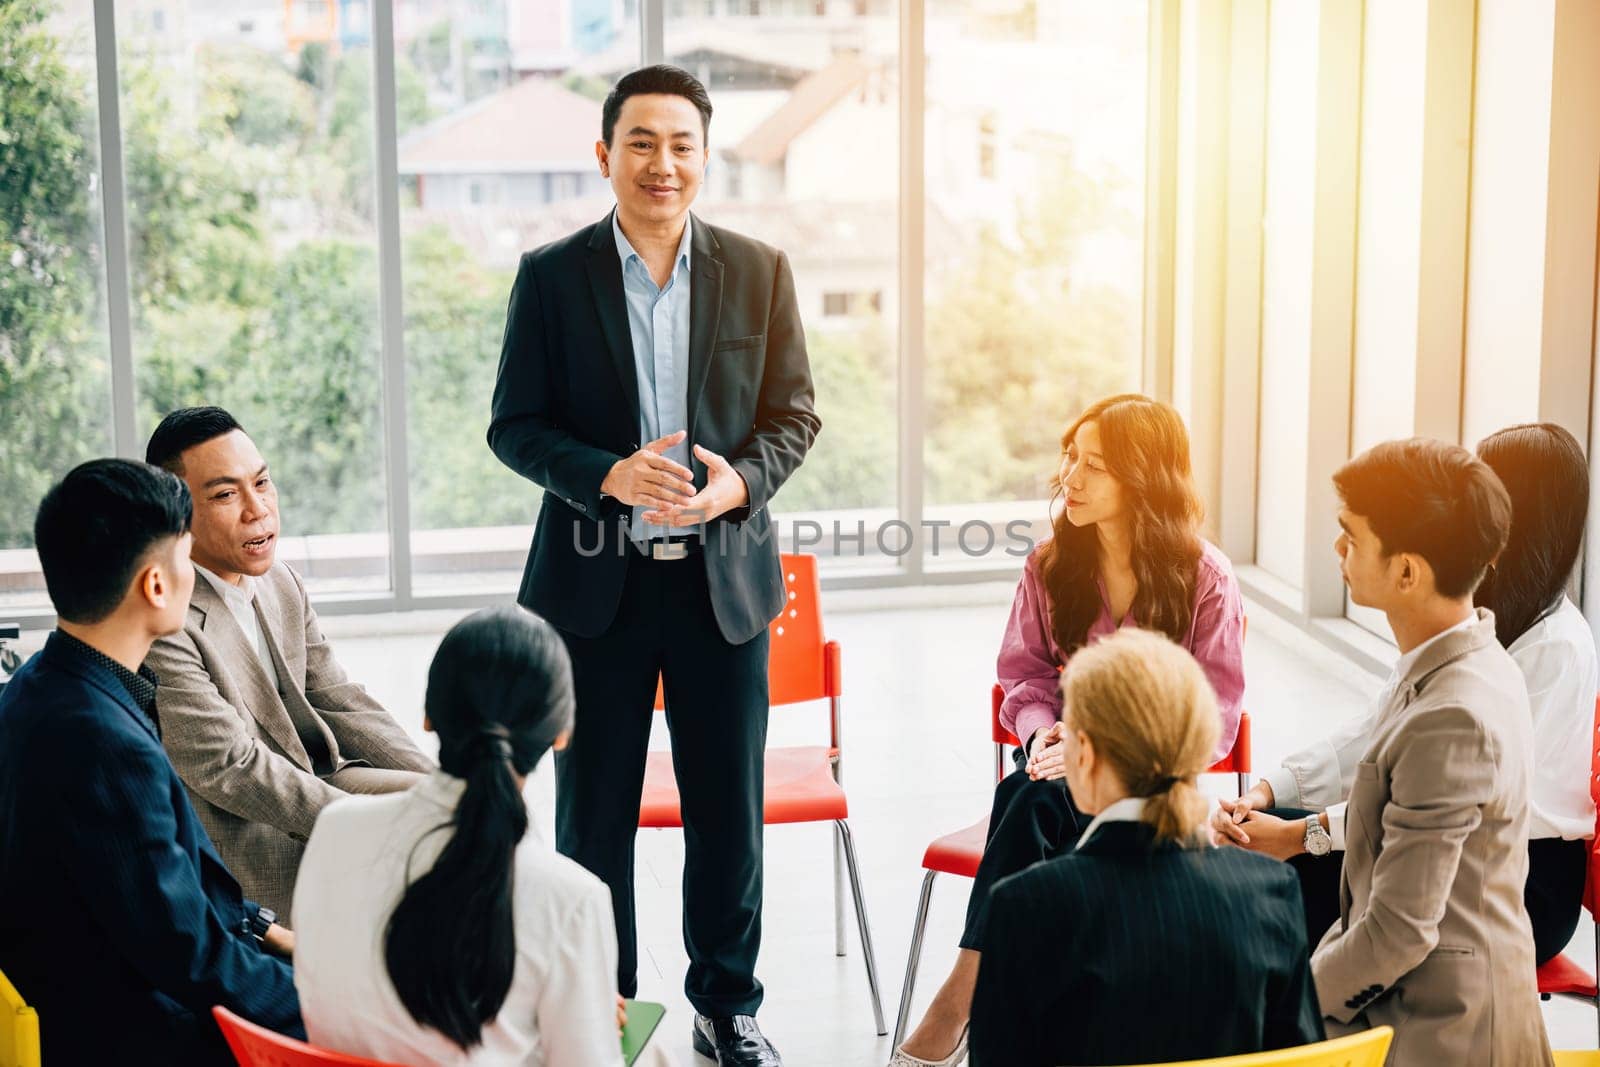 In a modern office, a diverse group of businesspeople plans, discusses, and presents in a business meeting seminar room. Their teamwork, diversity, and confidence drive success. by Sorapop